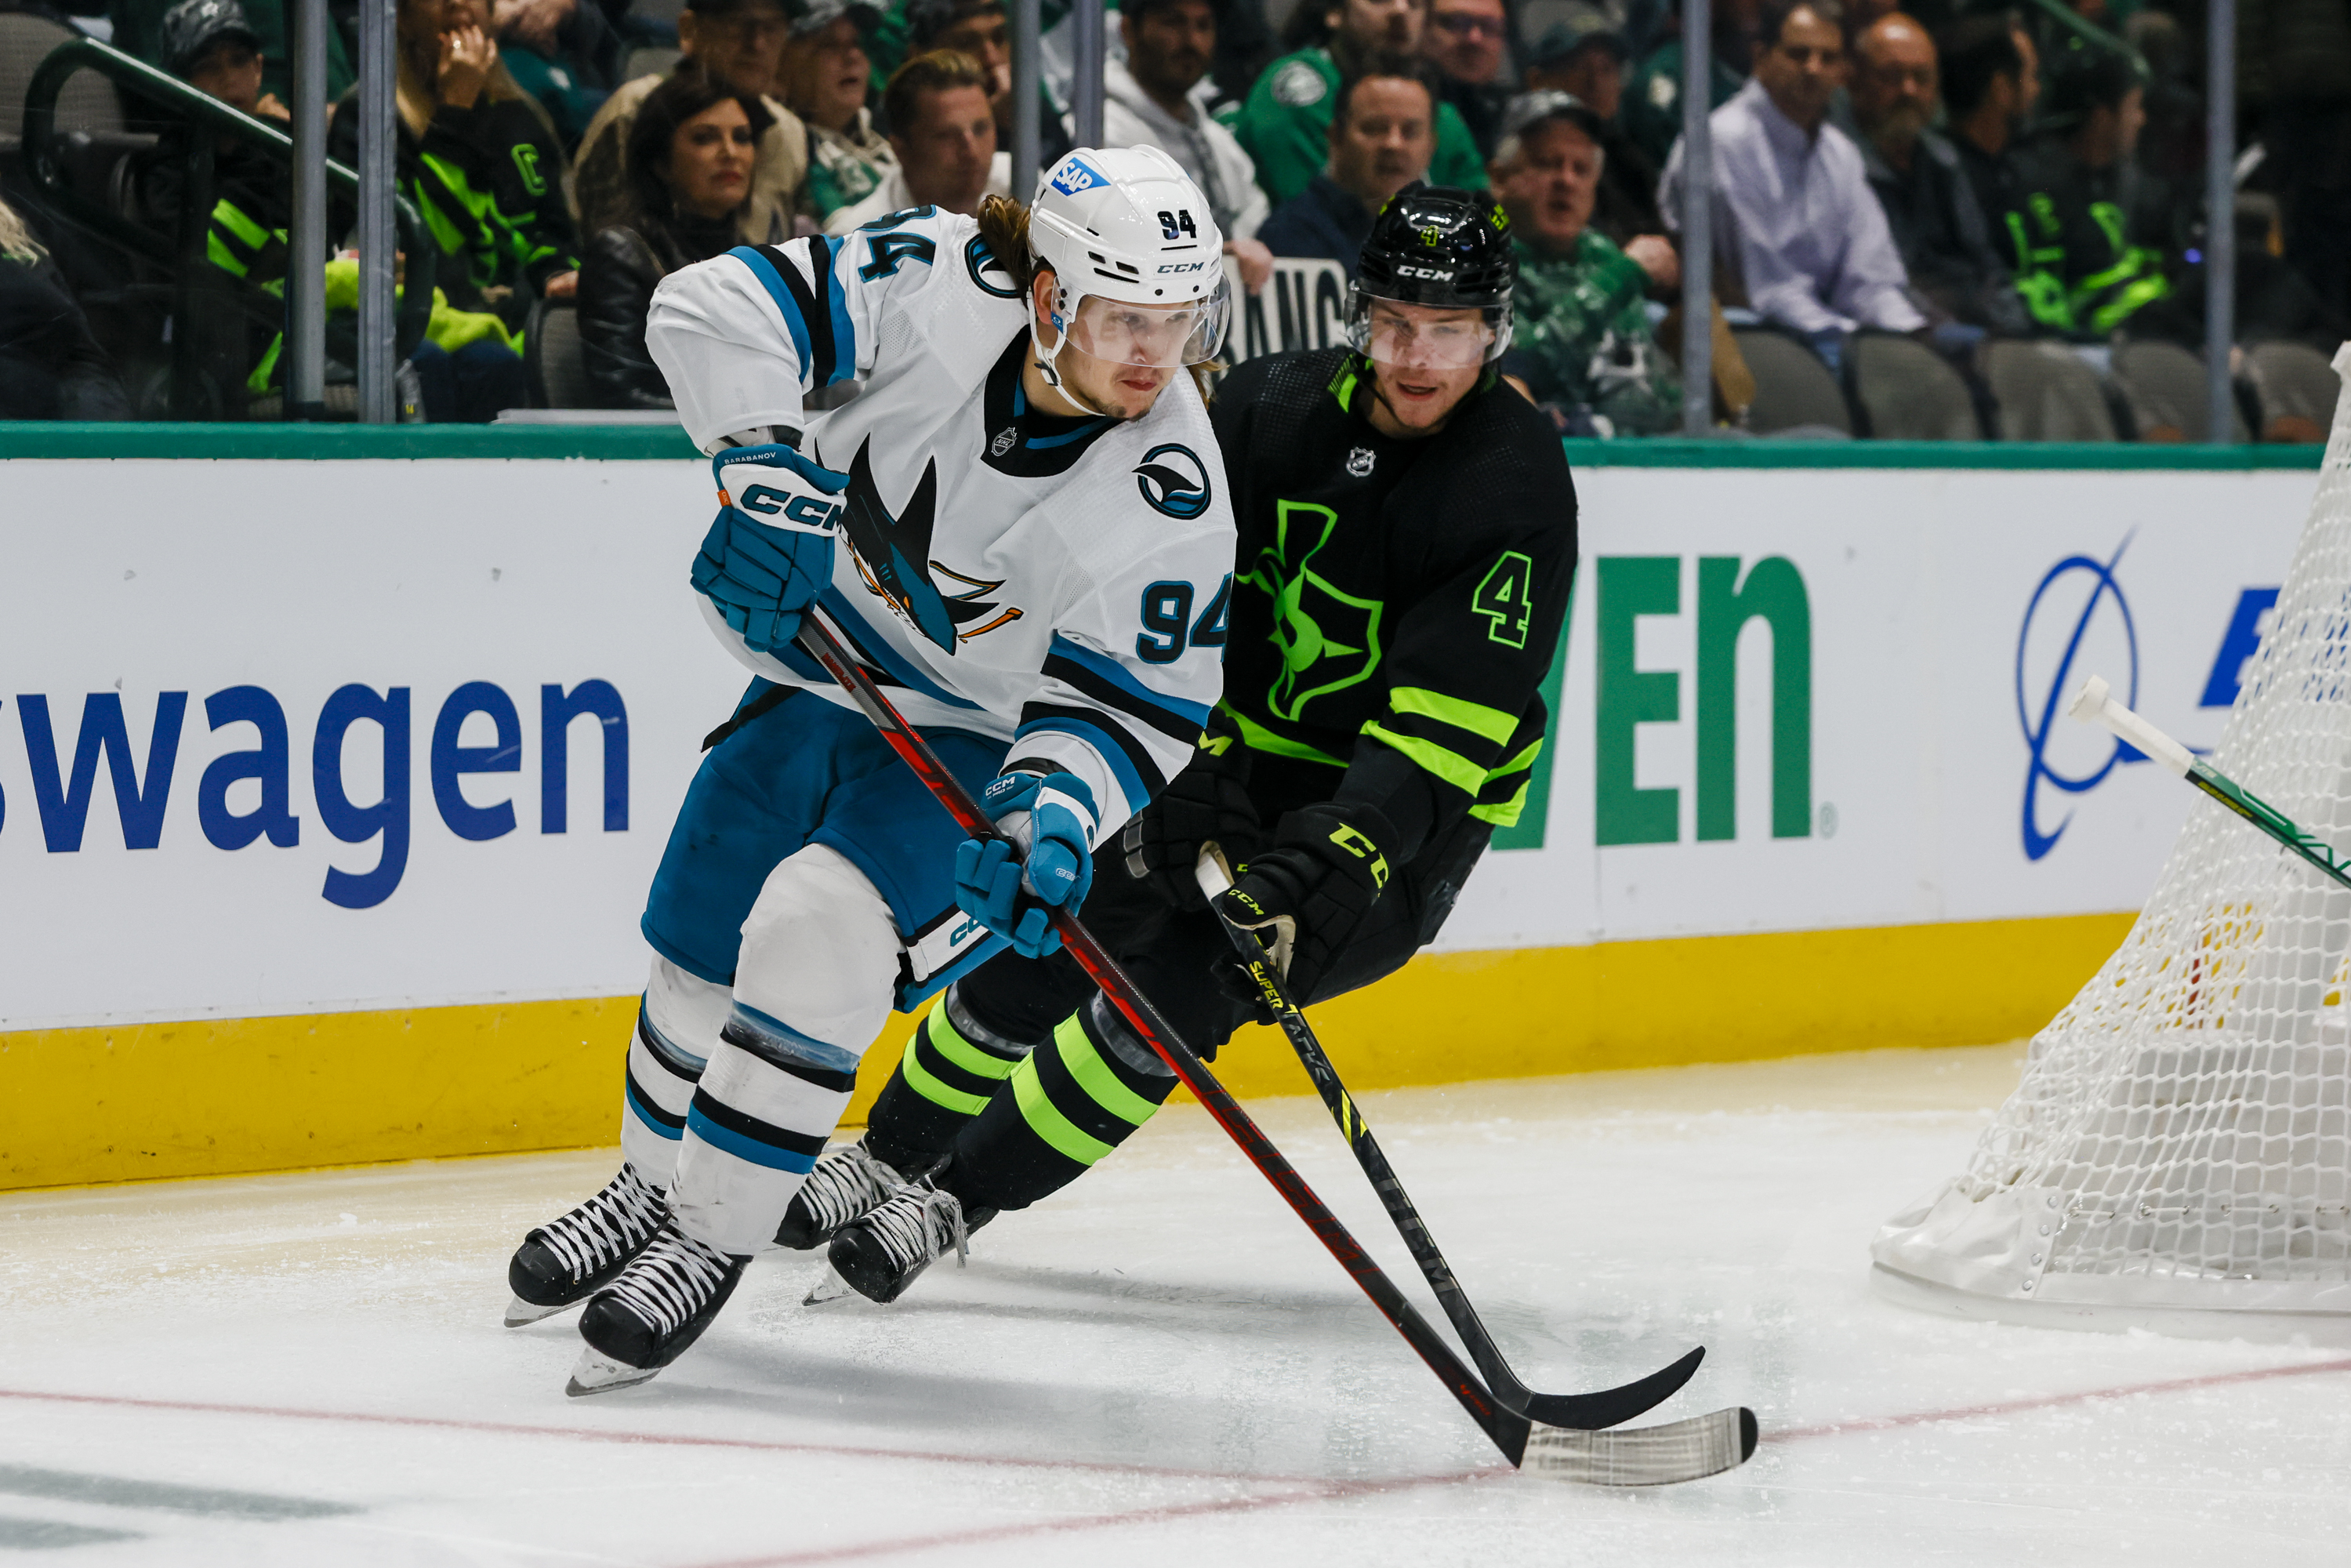 San Jose Sharks left wing Alexander Barabanov (94) and Dallas Stars defenseman Miro Heiskanen (4) chase the puck during the game between the Dallas Stars and the San Jose Sharks on November 11, 2022 at American Airlines Center in Dallas, Texas.